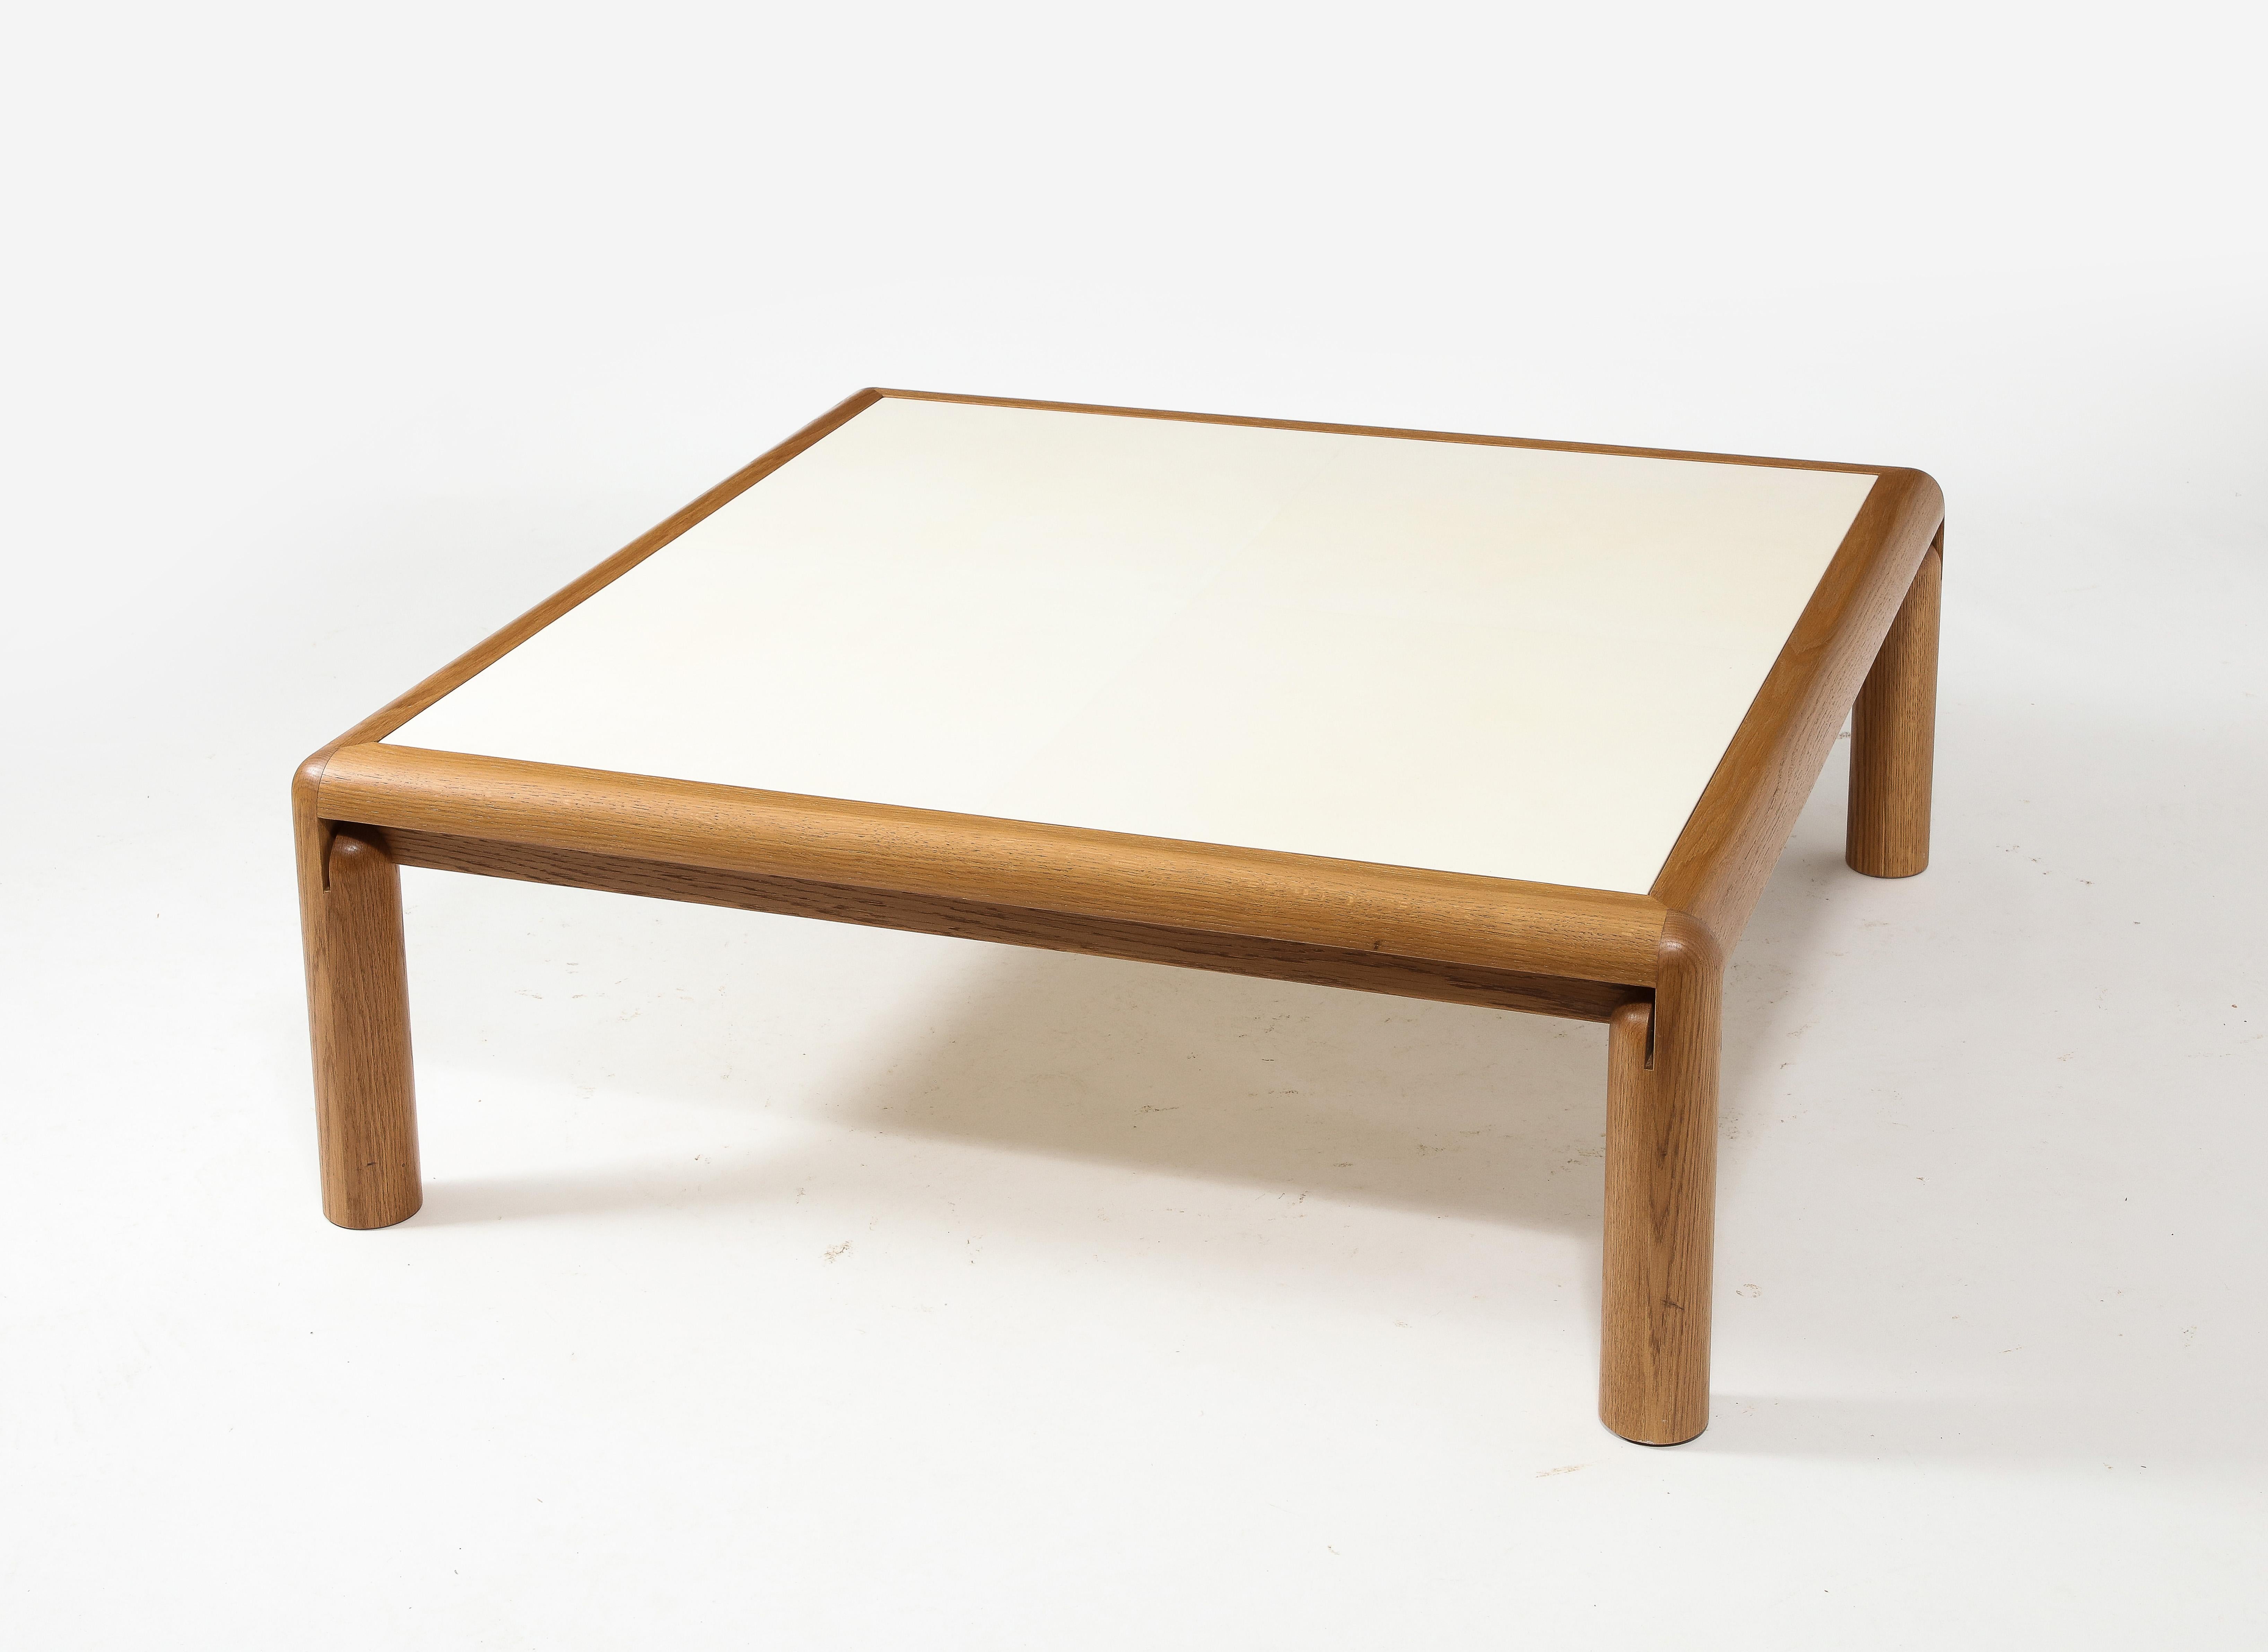 Contemporary Solid Oak & Parchment Square Coffee Table in Early Modern & Mid-Century Style For Sale